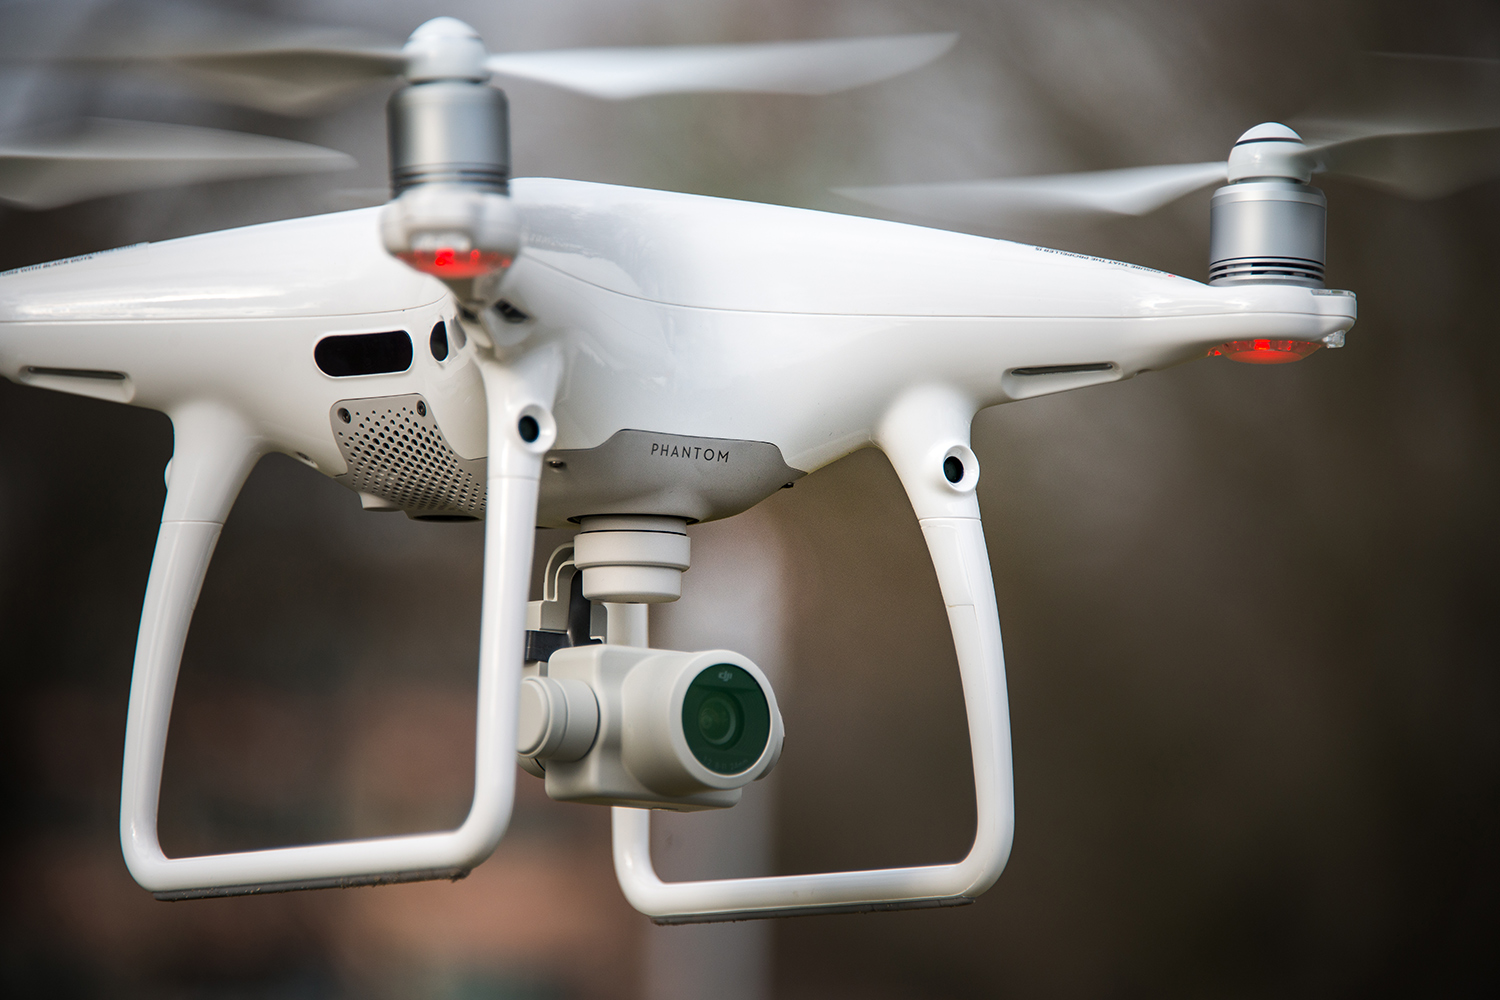 DJI Phantom 4 Pro review: DJI Phantom 4 Pro review: So you wanna be a drone  photographer? - CNET